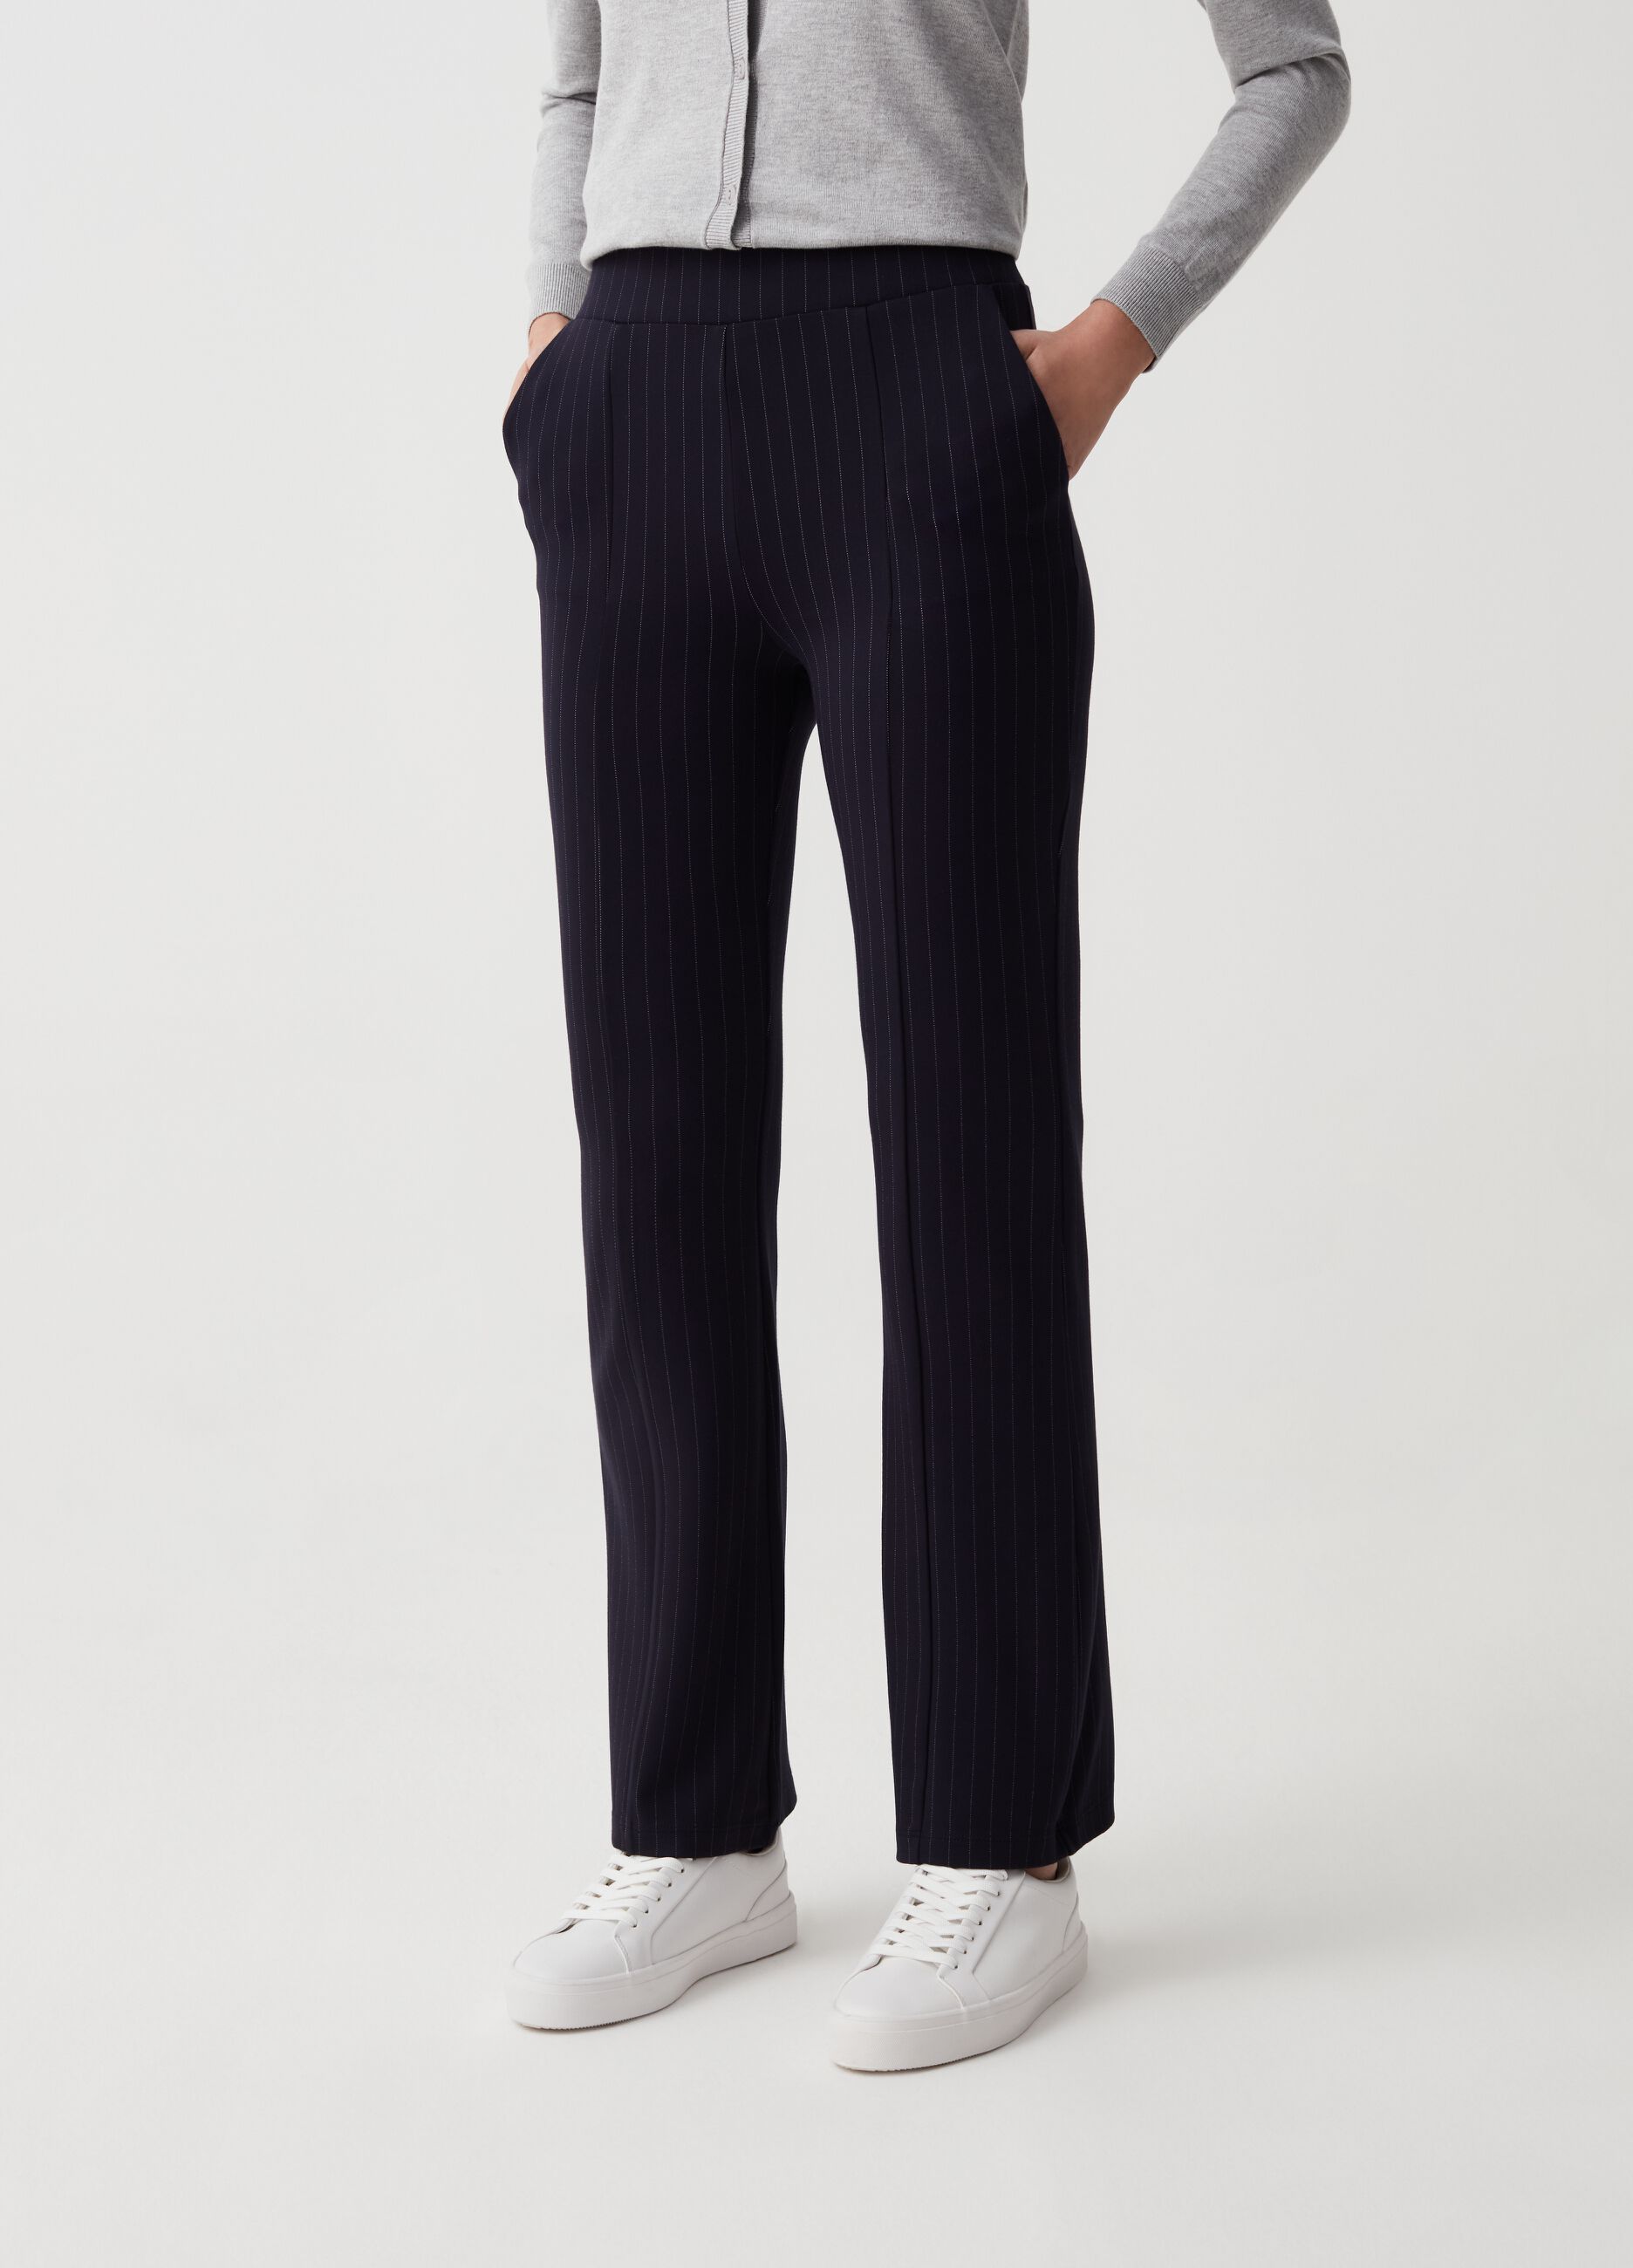 Flare-fit leggings with raised seams